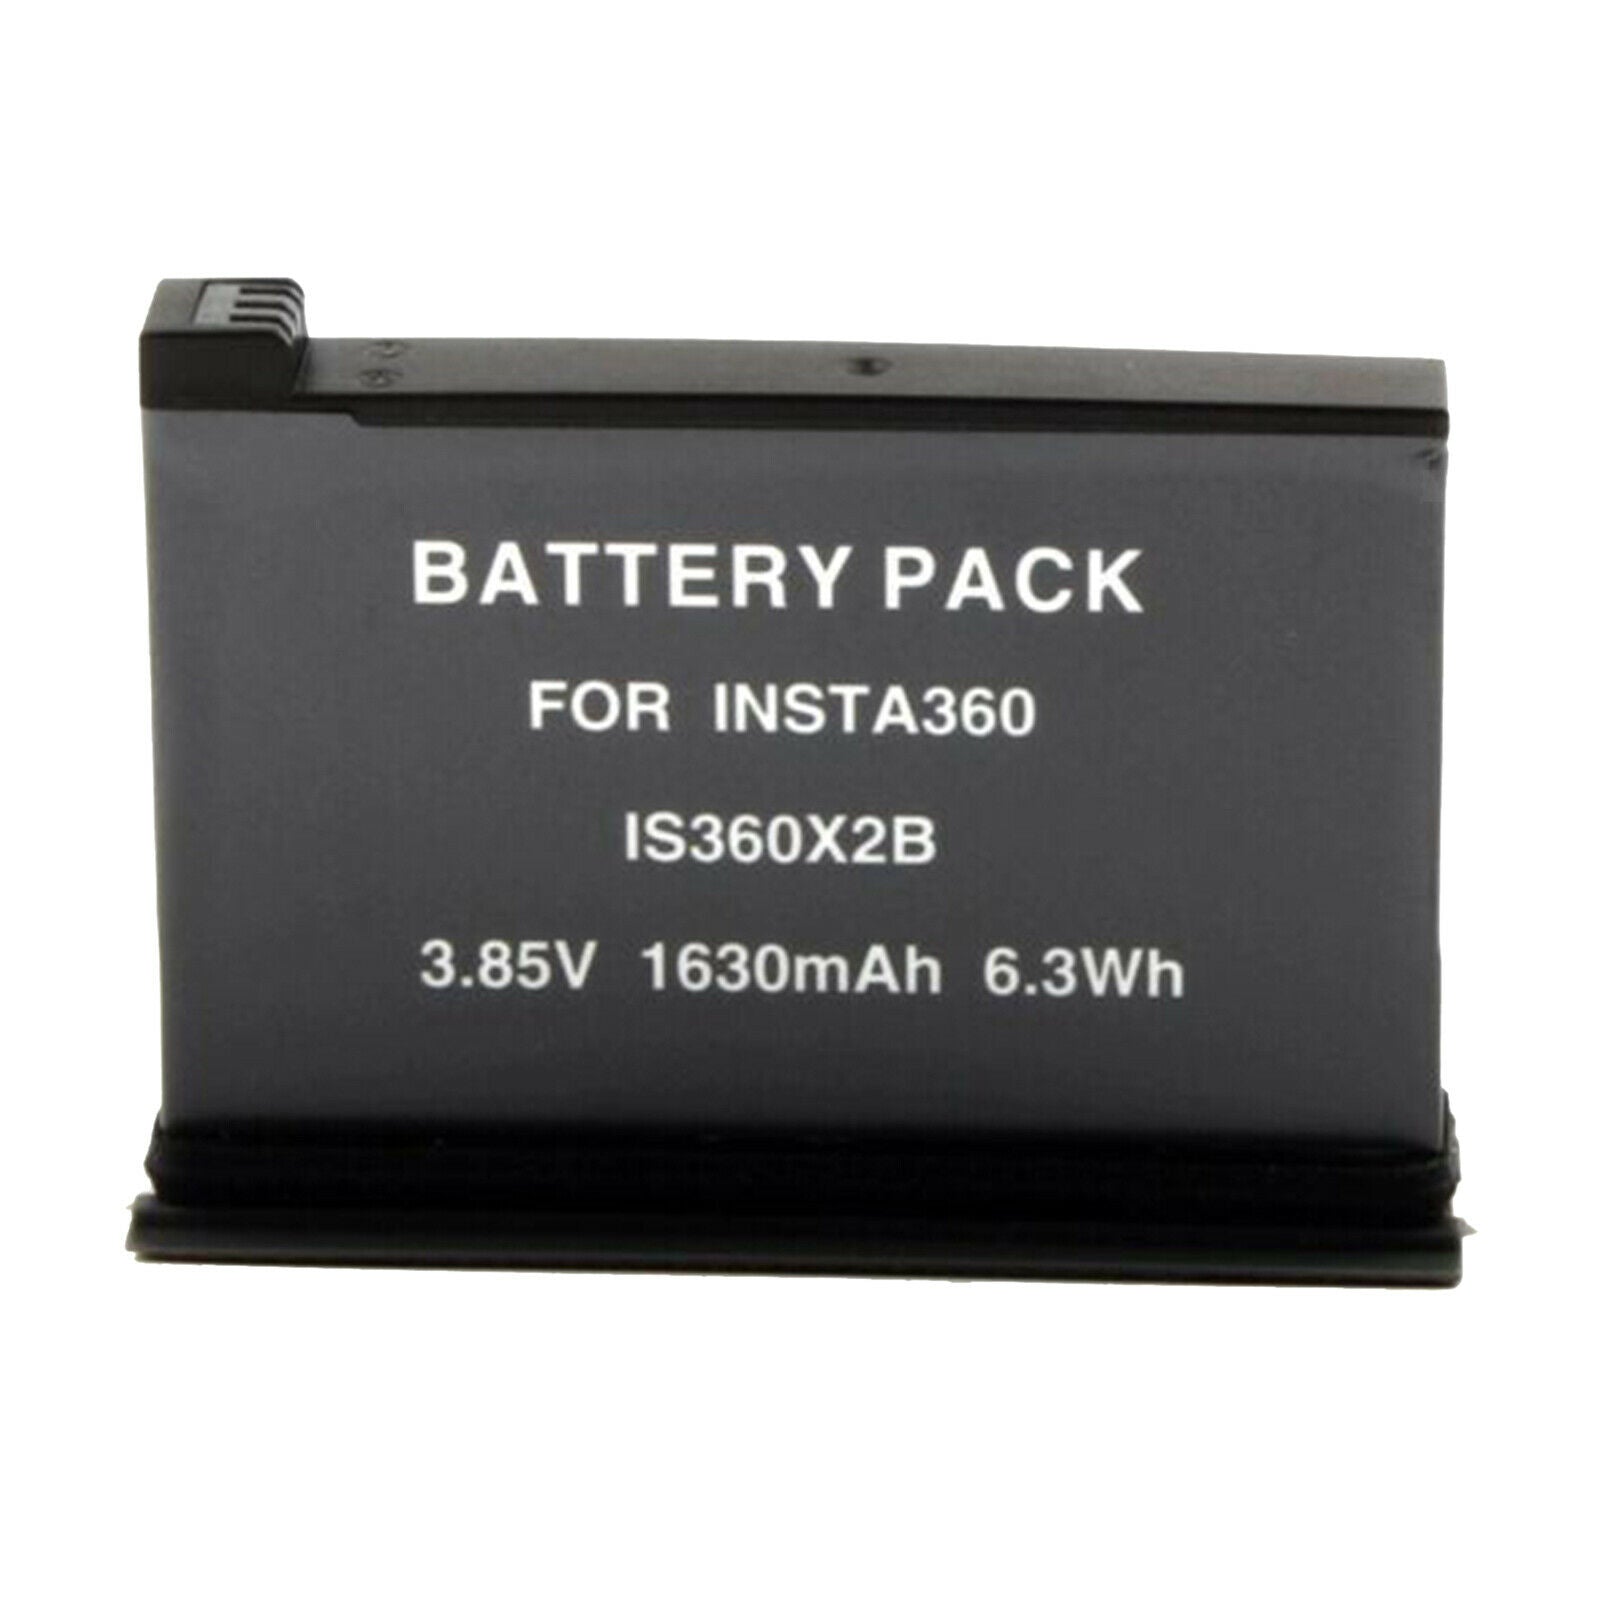 1630mAh Li-ion Battery Pack for Insta360 ONE X2 Action Camera Accessories